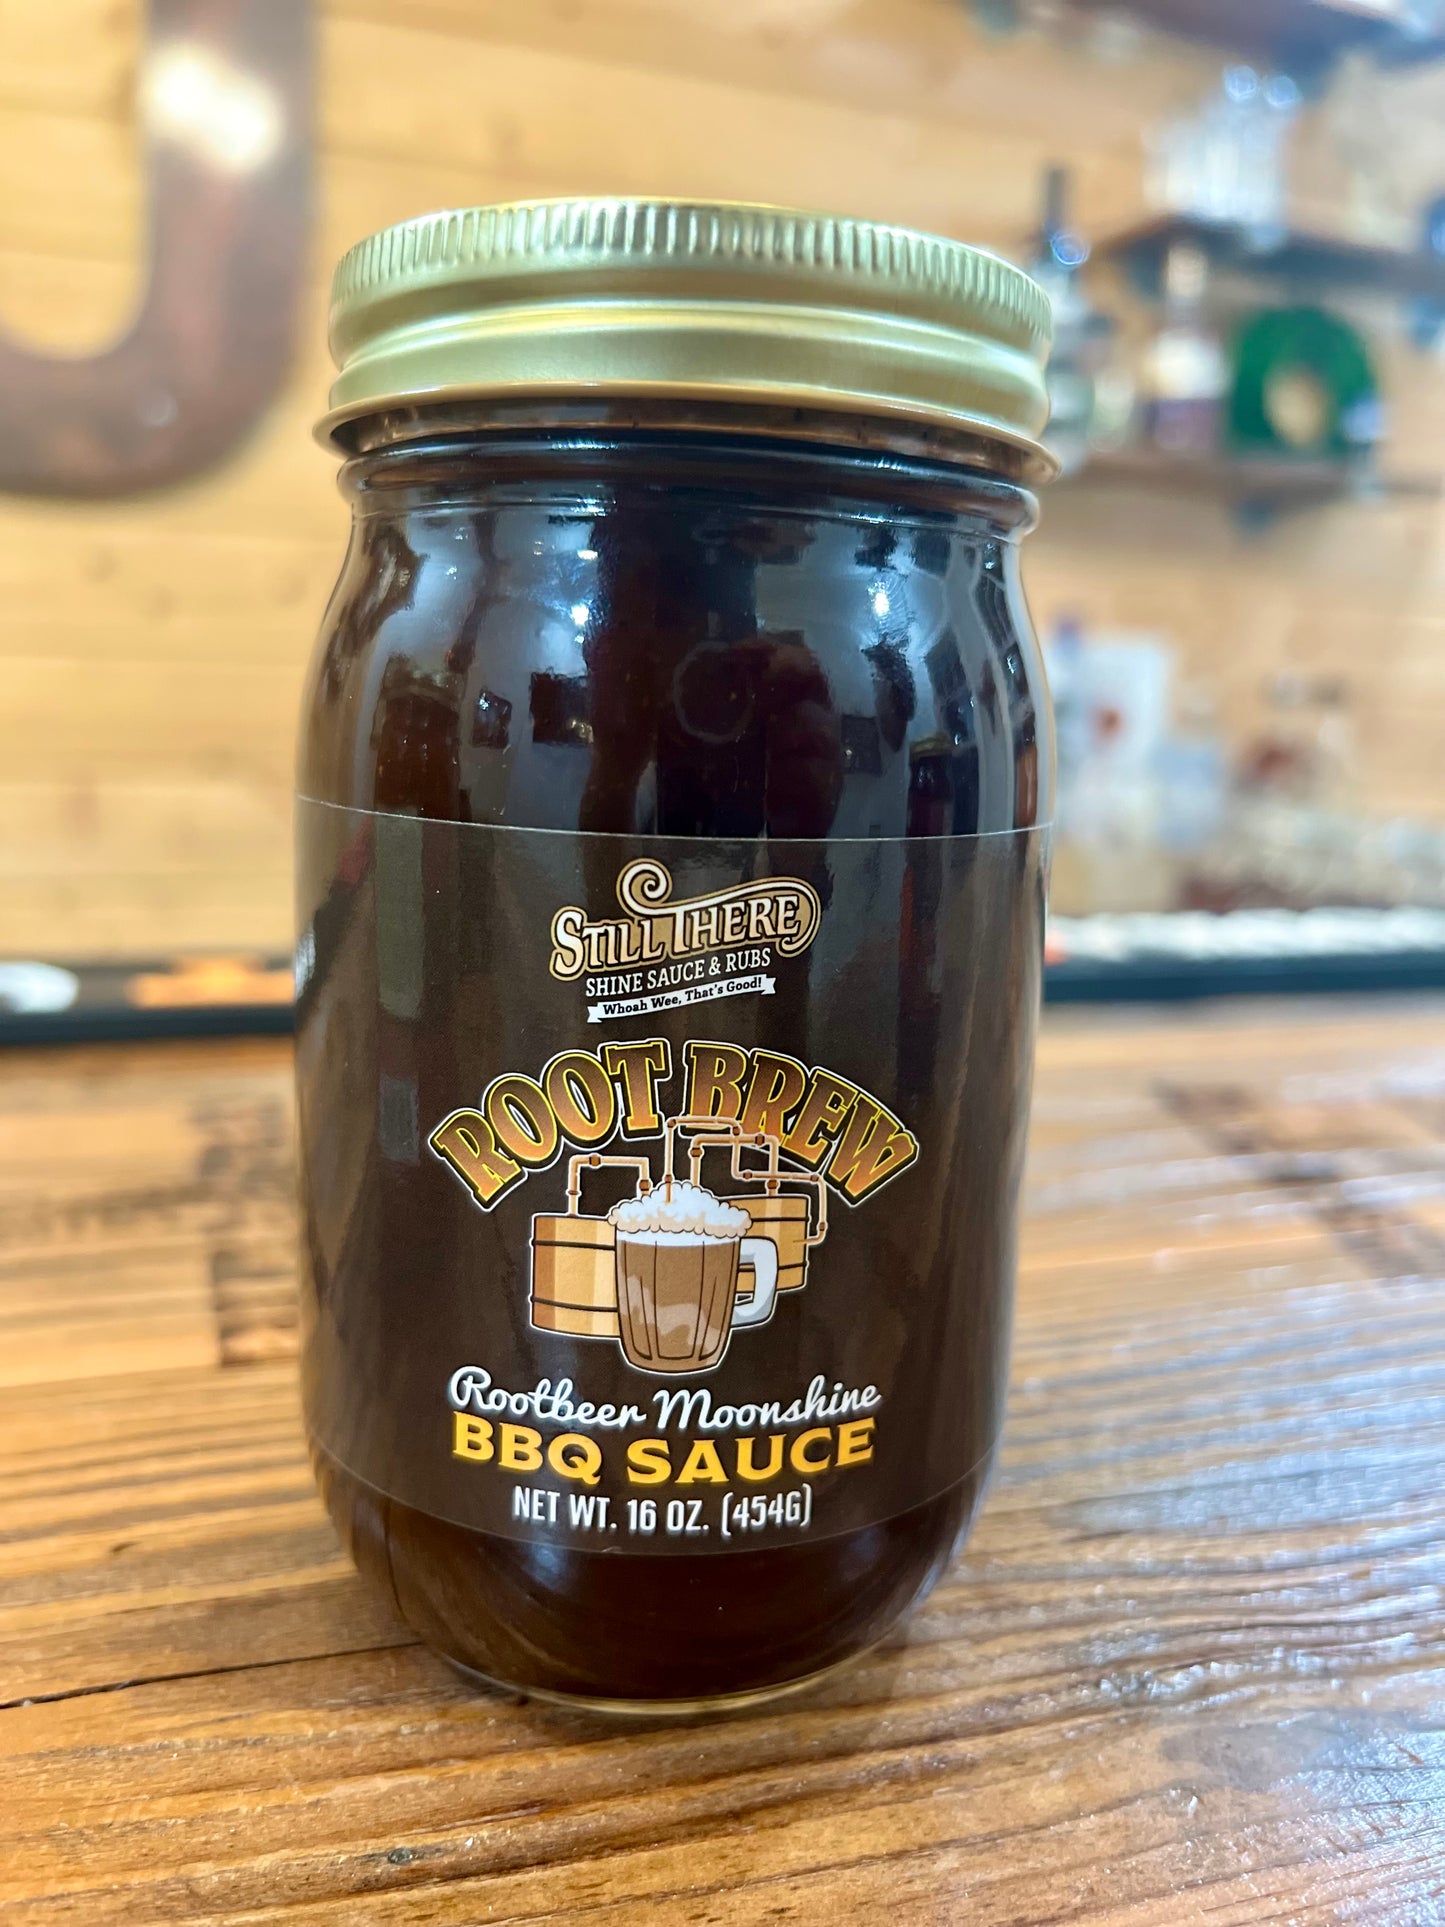 Still There Shine Sauce - Rootbeer Moonshine sauce 16 oz